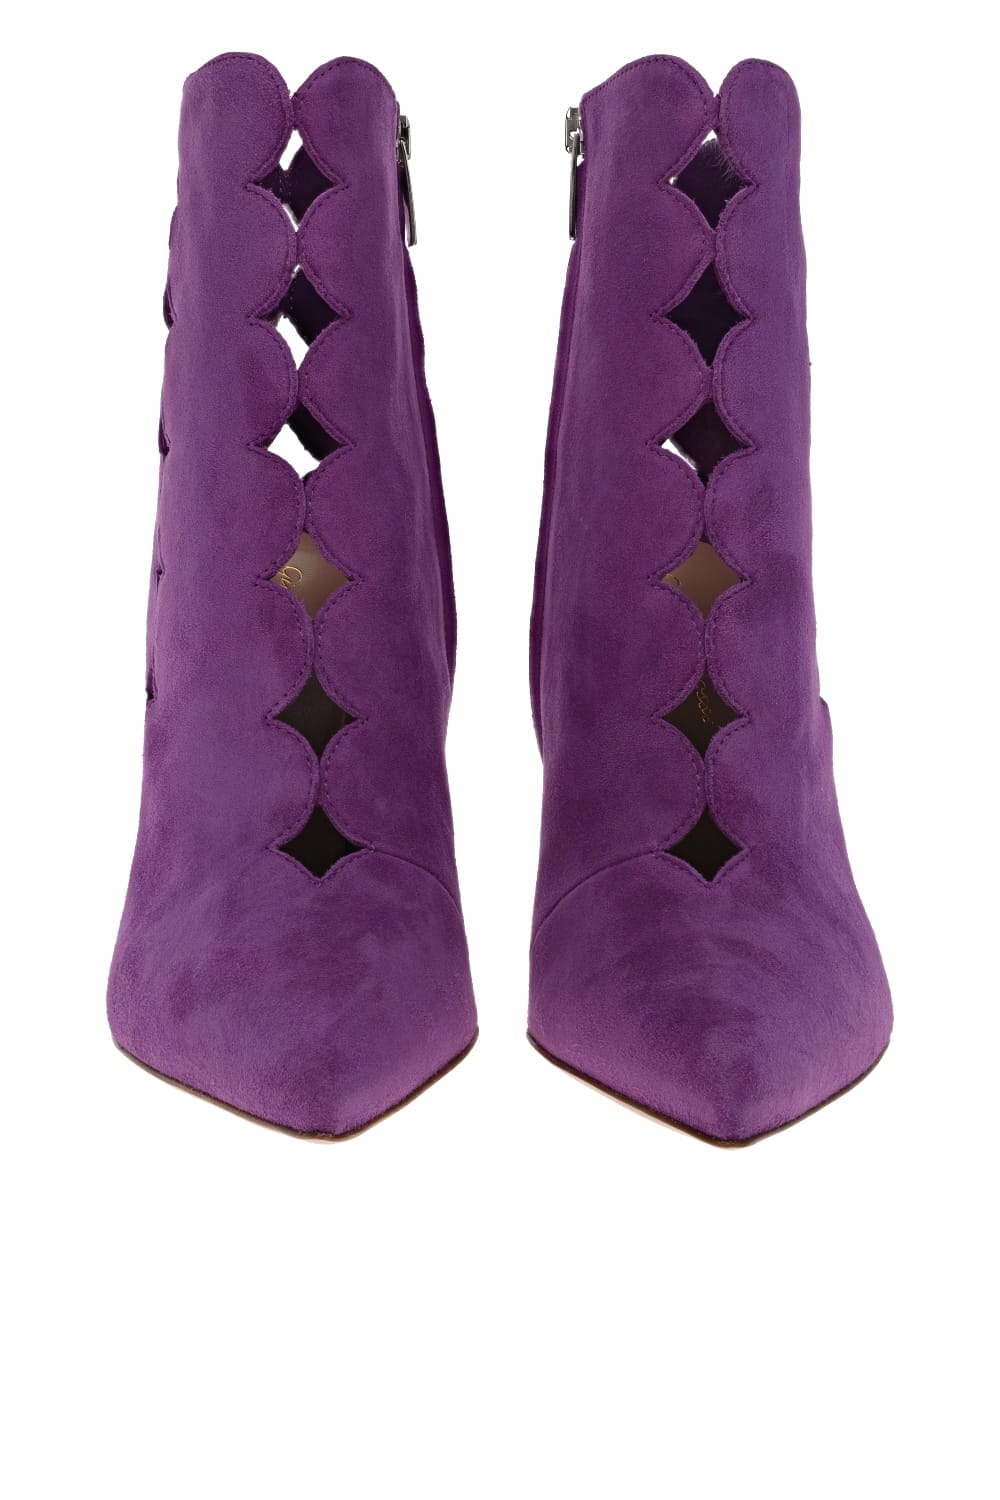 Gianvito Rossi Ariana Purple Suede Cut Out Booties